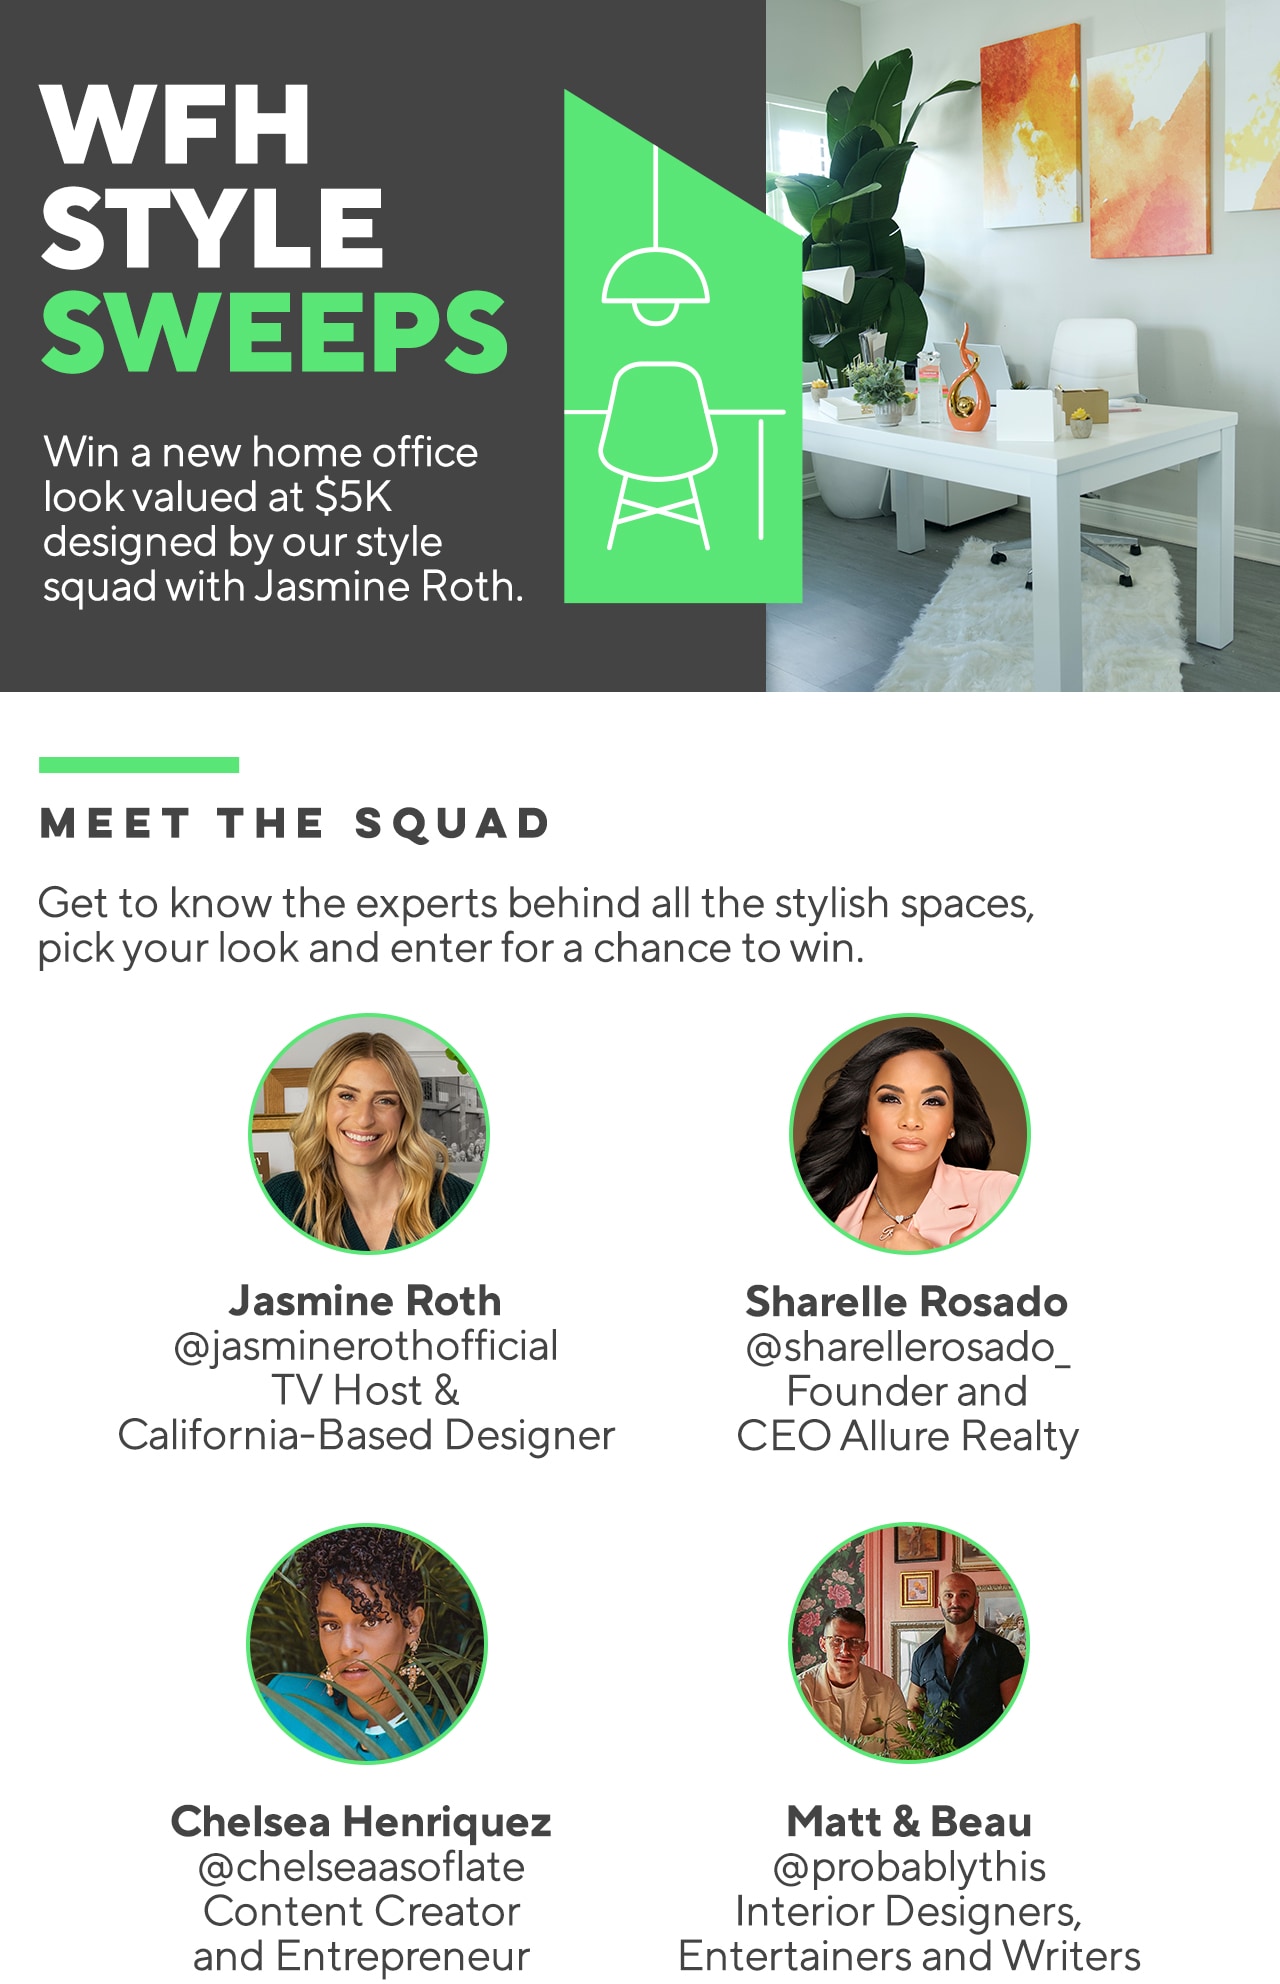 WFH STYLE SWEEPS Win a new home office look valued at $5k designed by our style squad with Jasmine Roth. MEET THE SQUAD Get to know the experts behind all the stylish spaces, pick your look and enter for a chance to win. Jasmine Roth @jasminerothofficial TV Host & California-Based Designer Sharelle Rosado @sharellerosado_ Founder and CEO Allure Realty Chelsea Henriquez @chelseaasoflate Content Creator and Entrepreneur Matt & Beau @probablythis Interior Designers, Entertainers and Writers  WFH STYLE SWEEPS Win a new home office look valued at $5K designed by our style squad with Jasmine Roth. MEET THE SQUAD Get to know the experts behind all the stylish spaces, pick your look and enter for a chance to win. 7 Jasmine Roth Sharelle Rosado @jasminerothofficial @sharellerosado TV Host Founder and California-Based Designer CEO Allure Realty Chelsea Henriquez Matt Beau @chelseaasoflate @probablythis Content Creator Interior Designers, and Entrepreneur Entertainers and Writers 